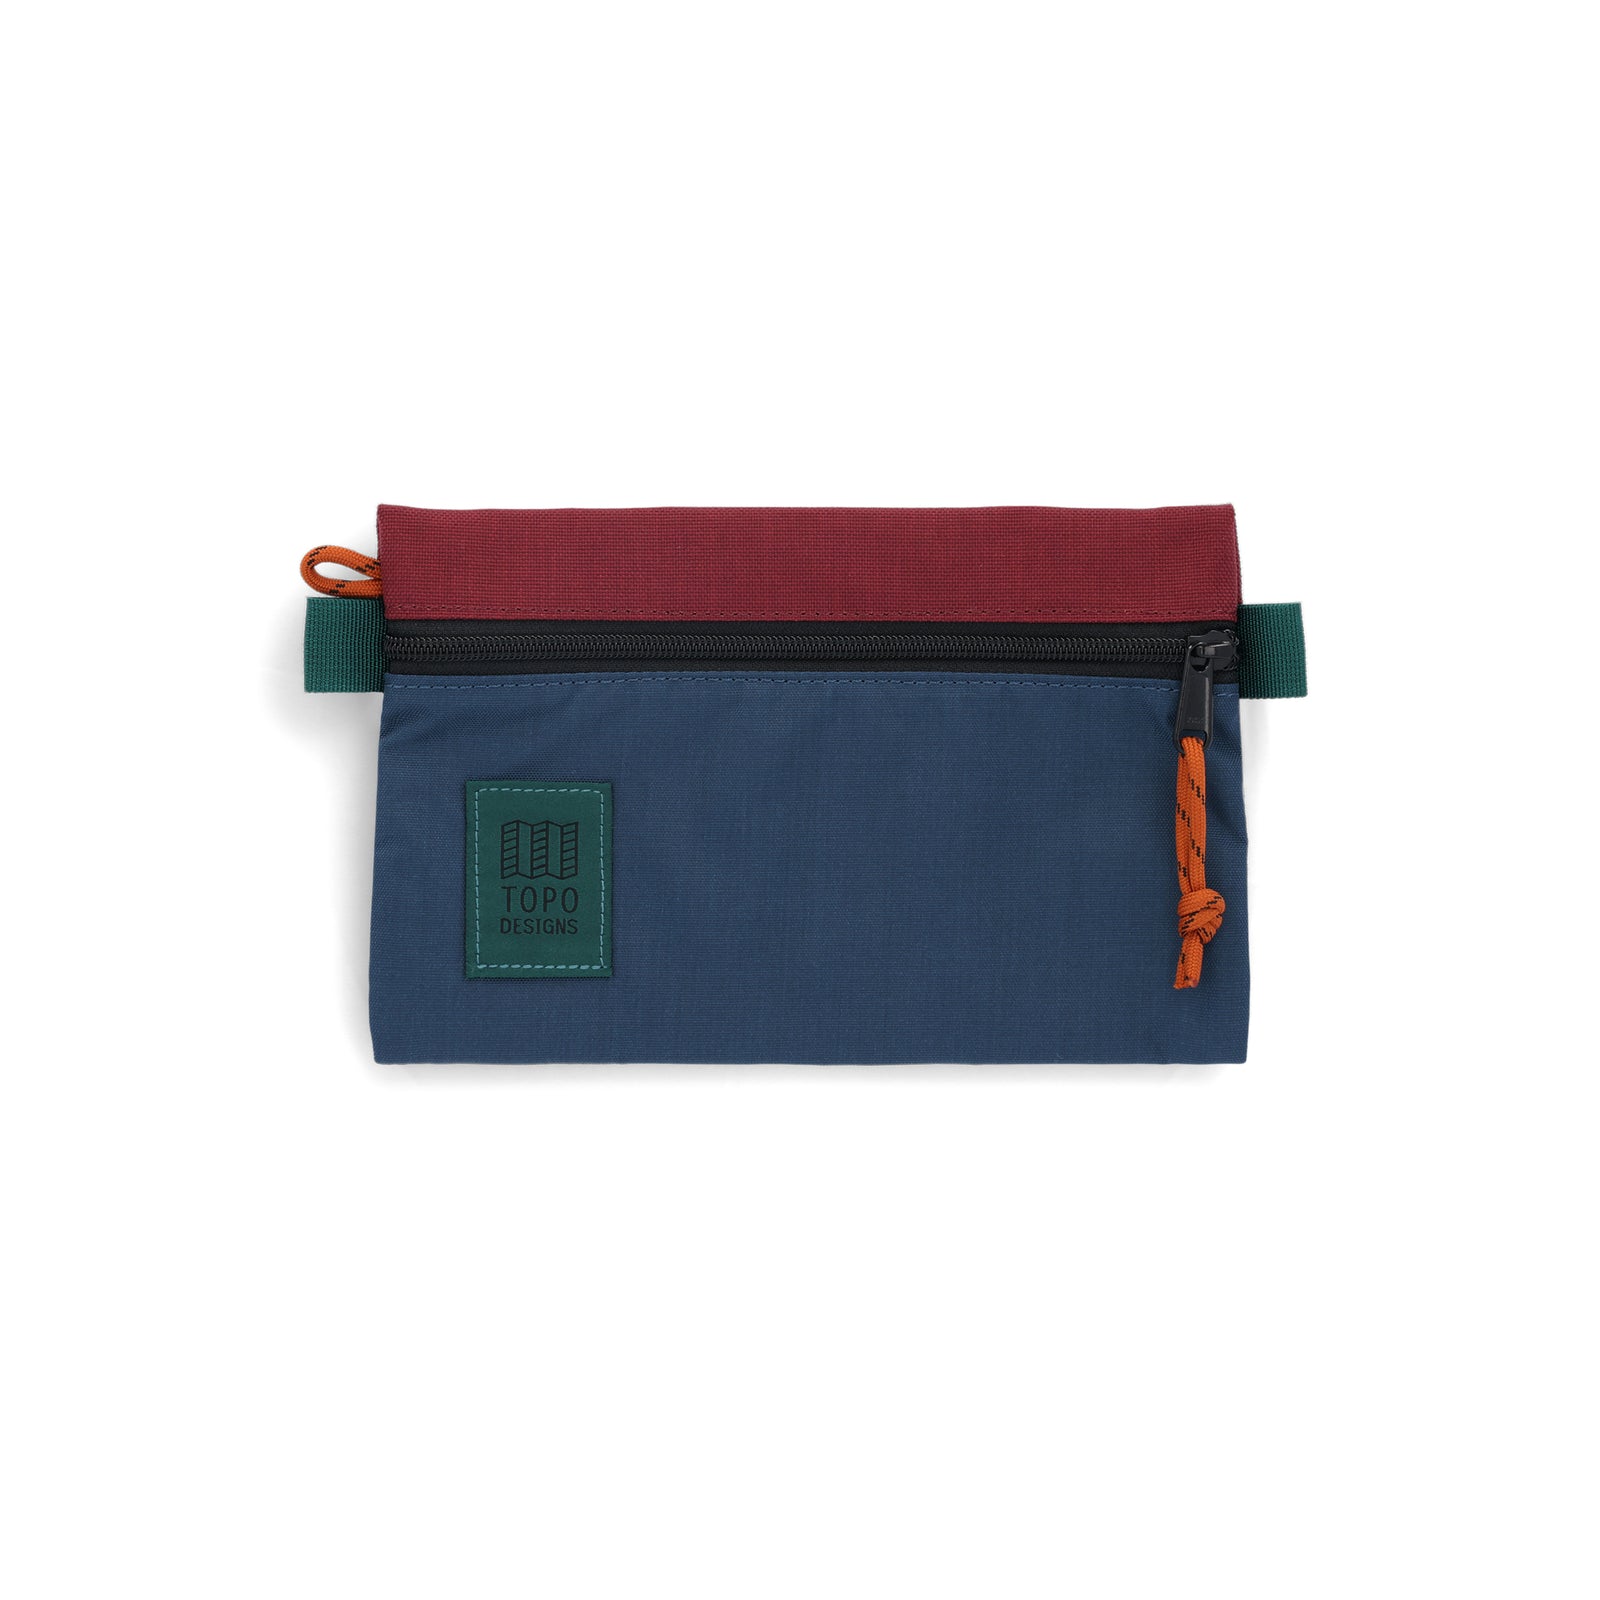 Topo Designs Accessory Bag in "Small" "Pond Blue / Zinfandel - Recycled" red nylon.